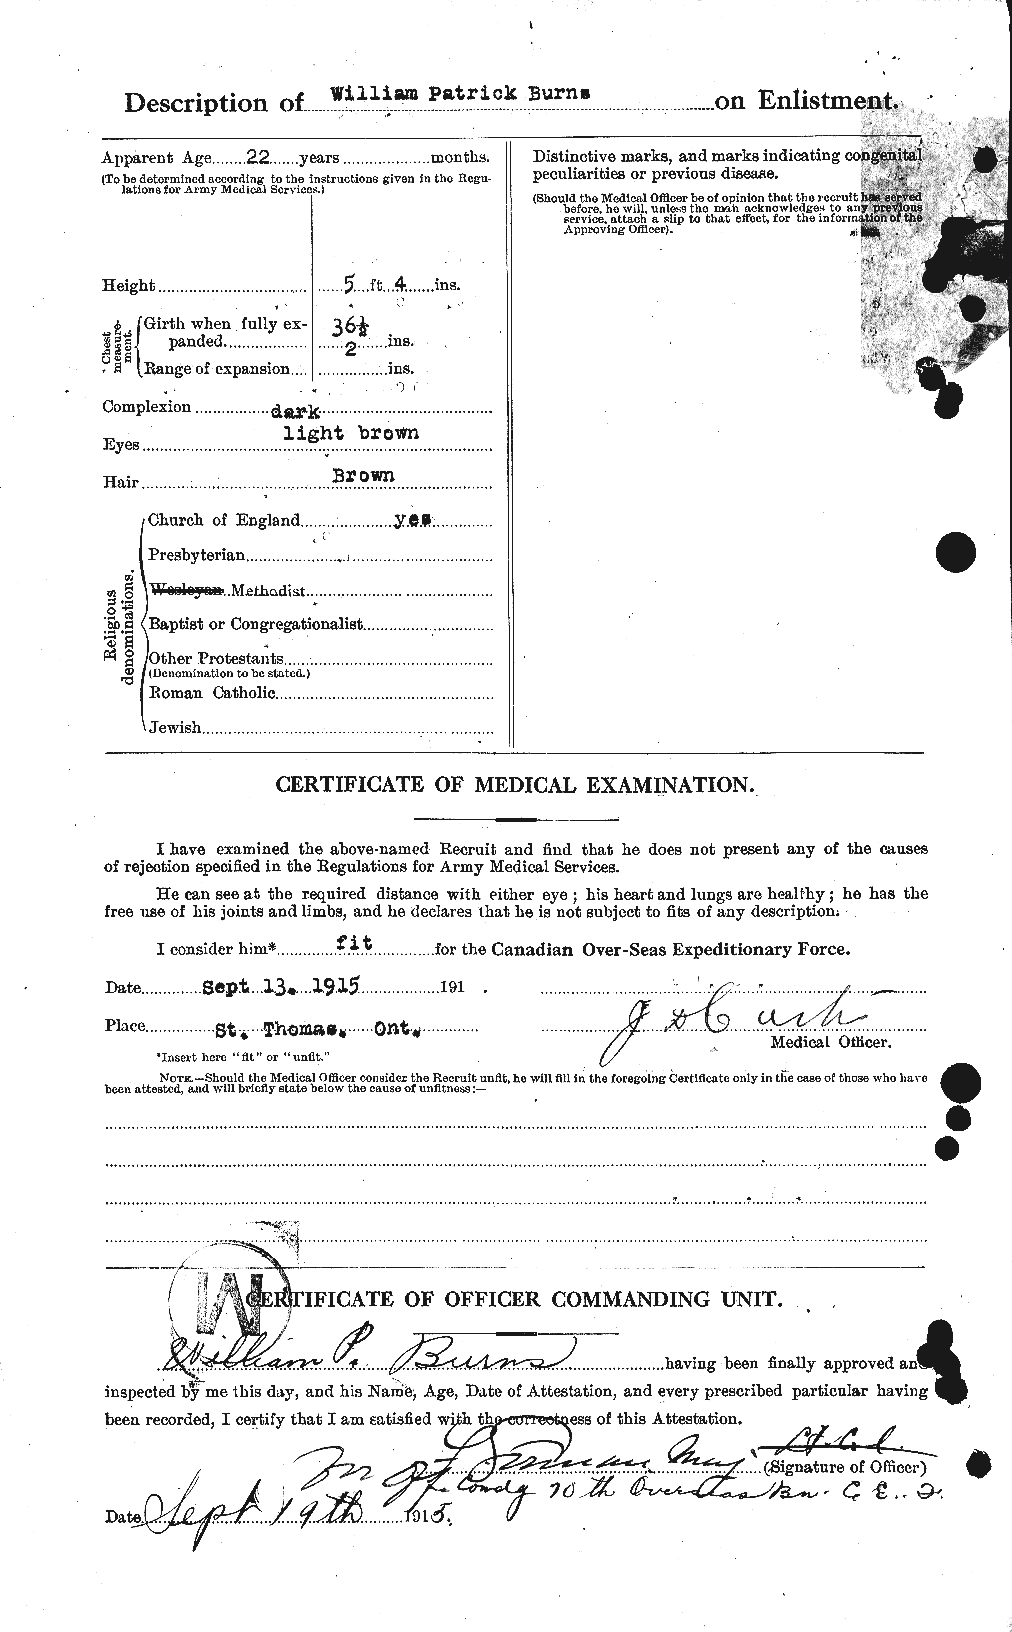 Personnel Records of the First World War - CEF 273849b